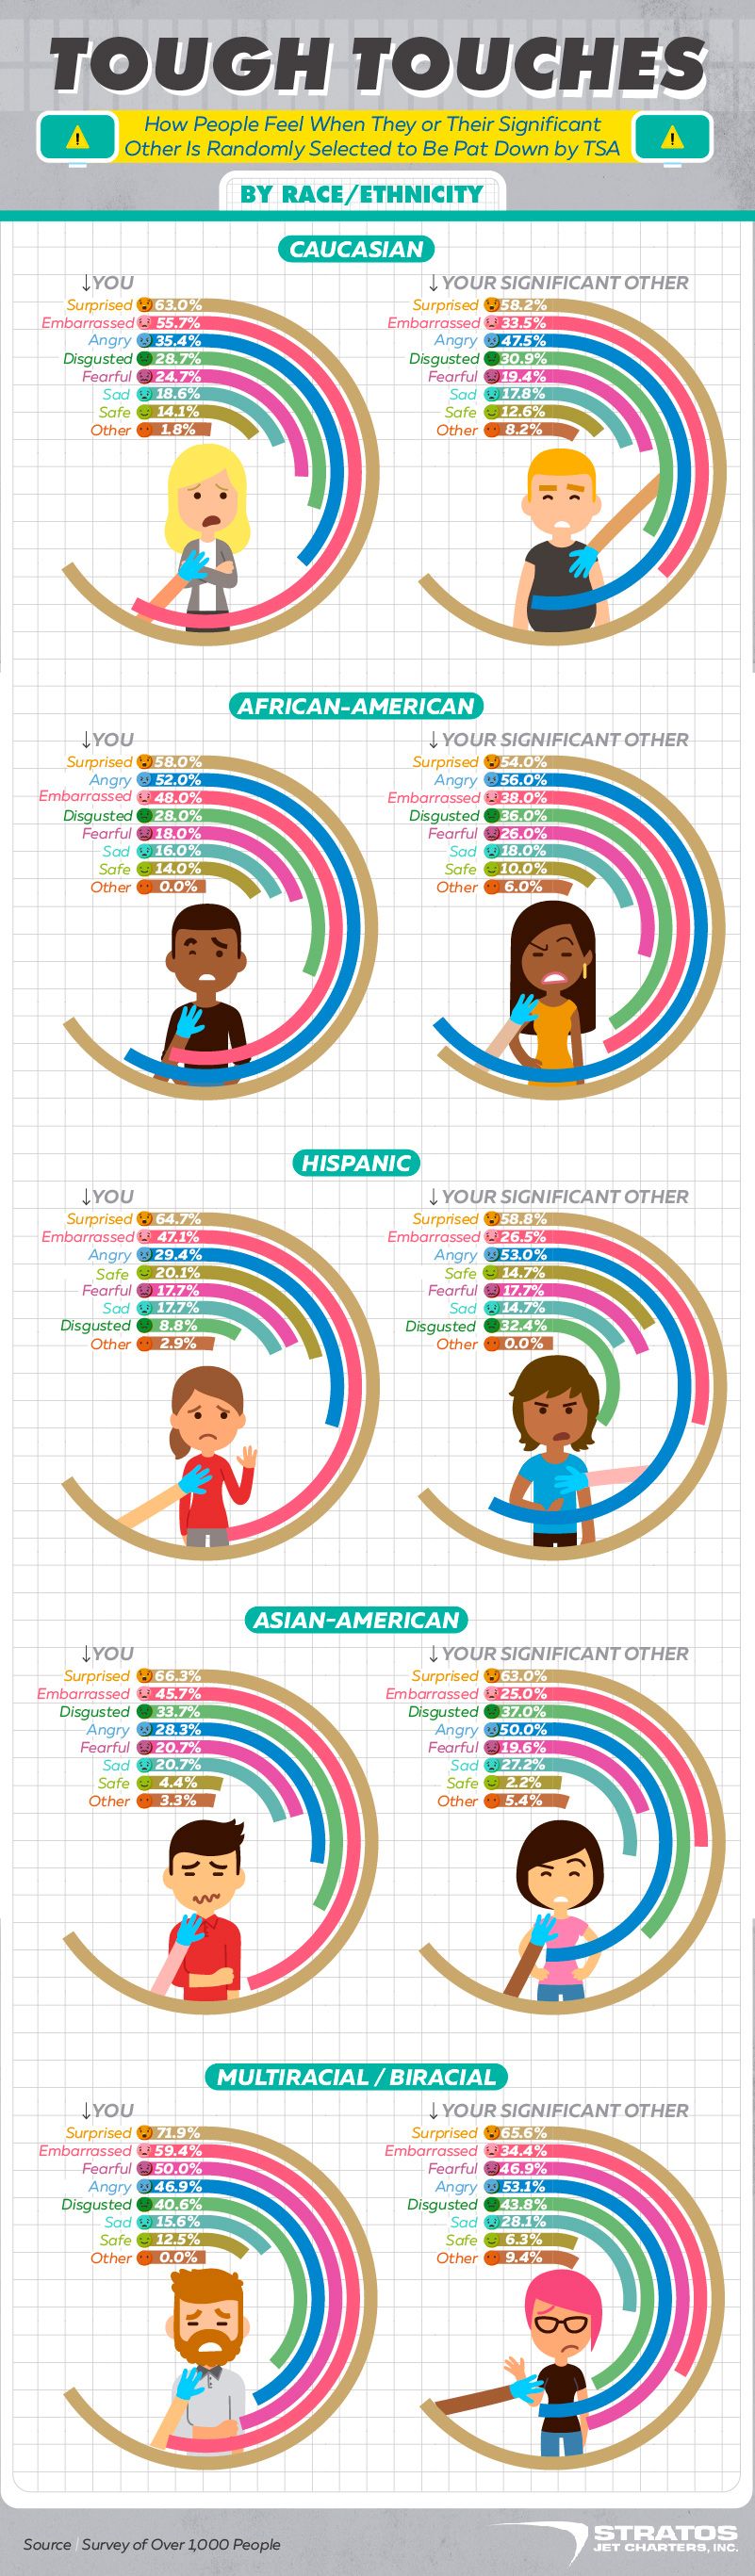 How people feel when their partner is touched by TSA racial infographic